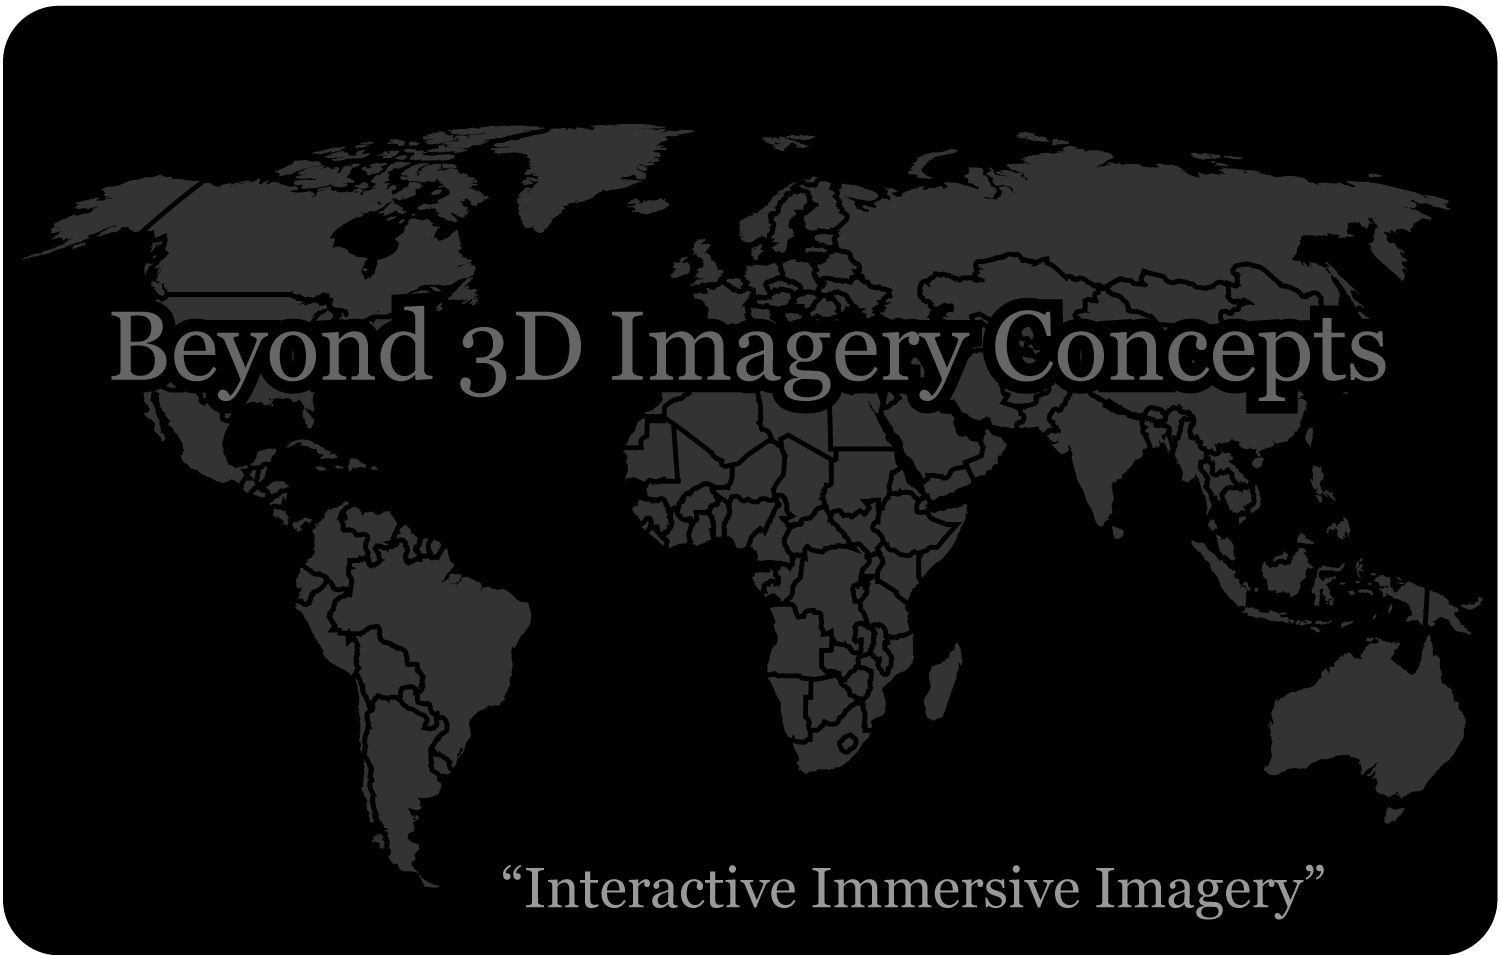 Beyond 3D Imagery Concepts